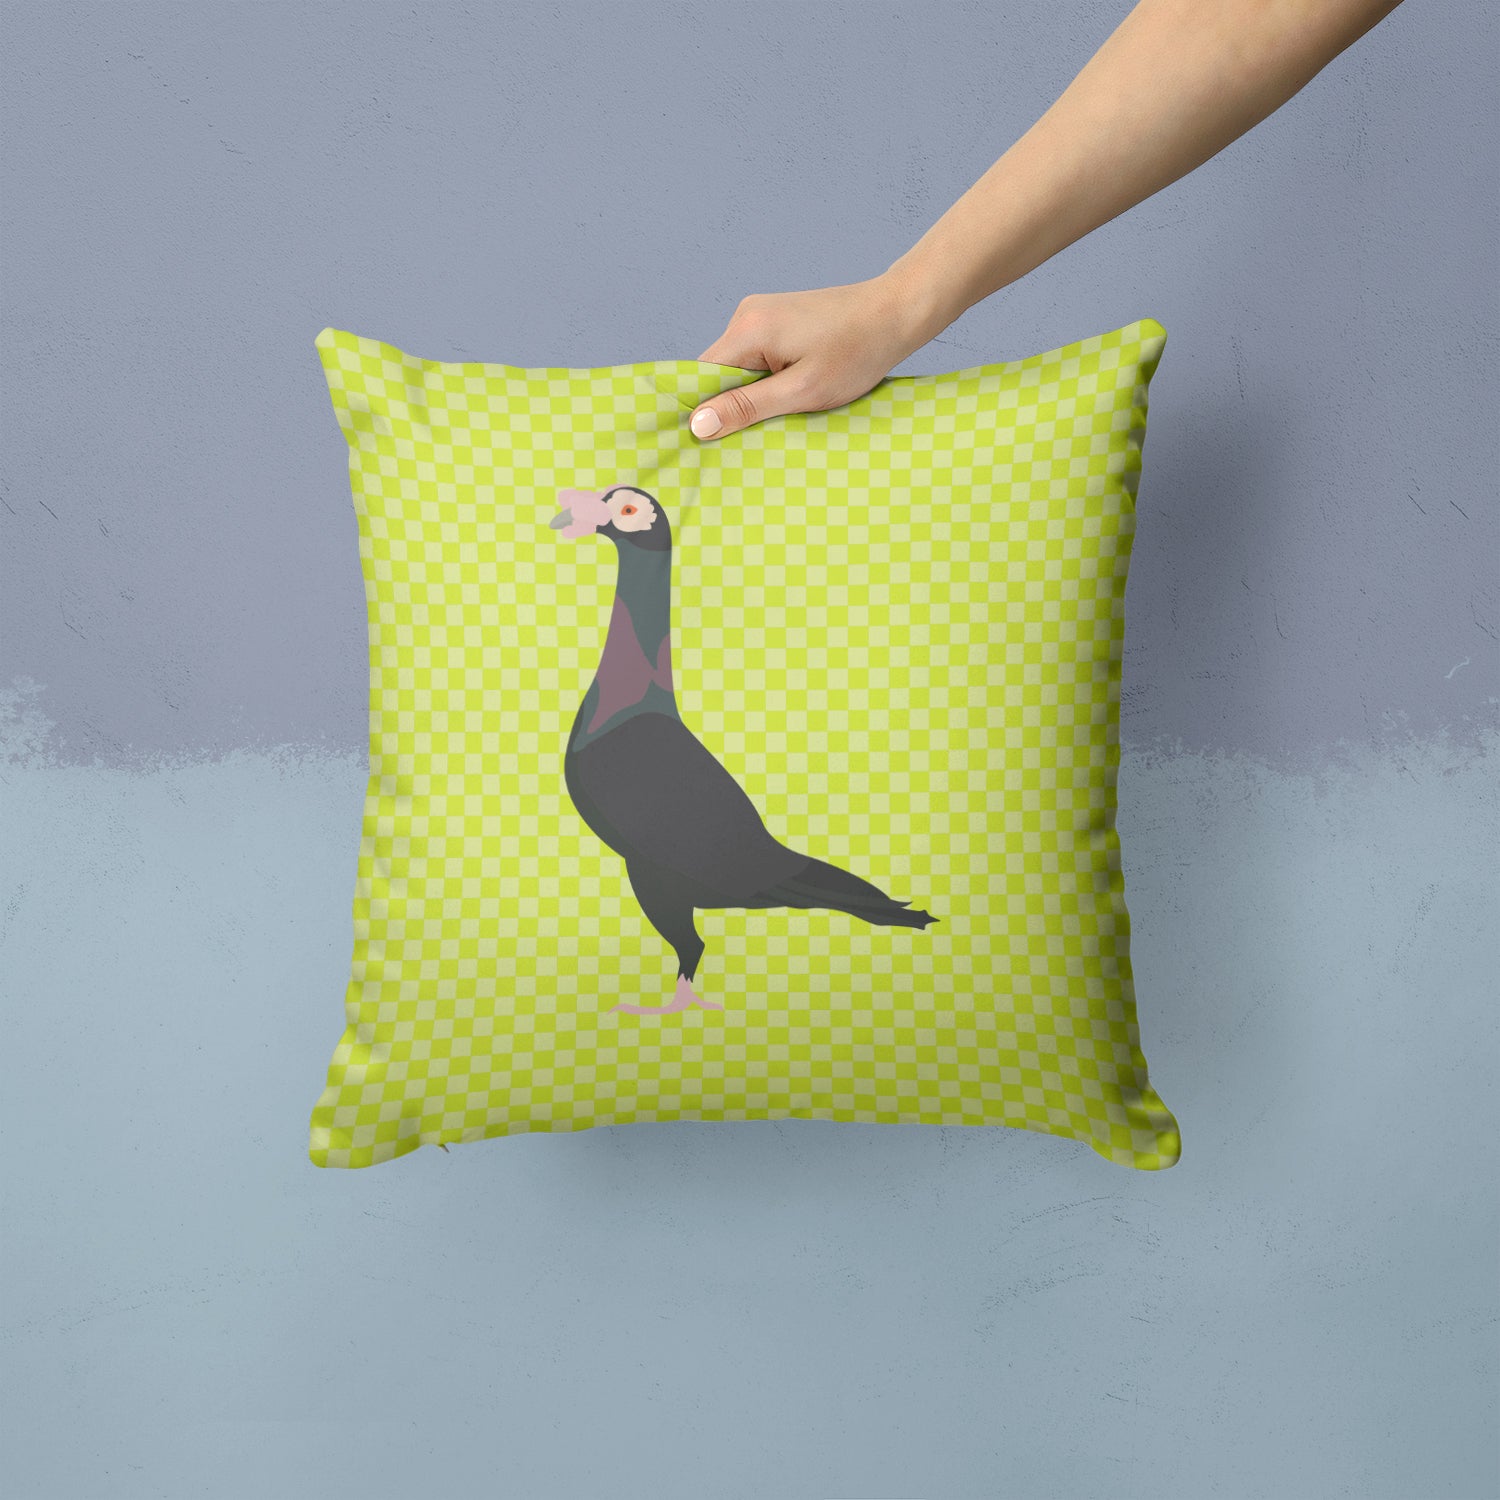 English Carrier Pigeon Green Fabric Decorative Pillow BB7771PW1414 - the-store.com